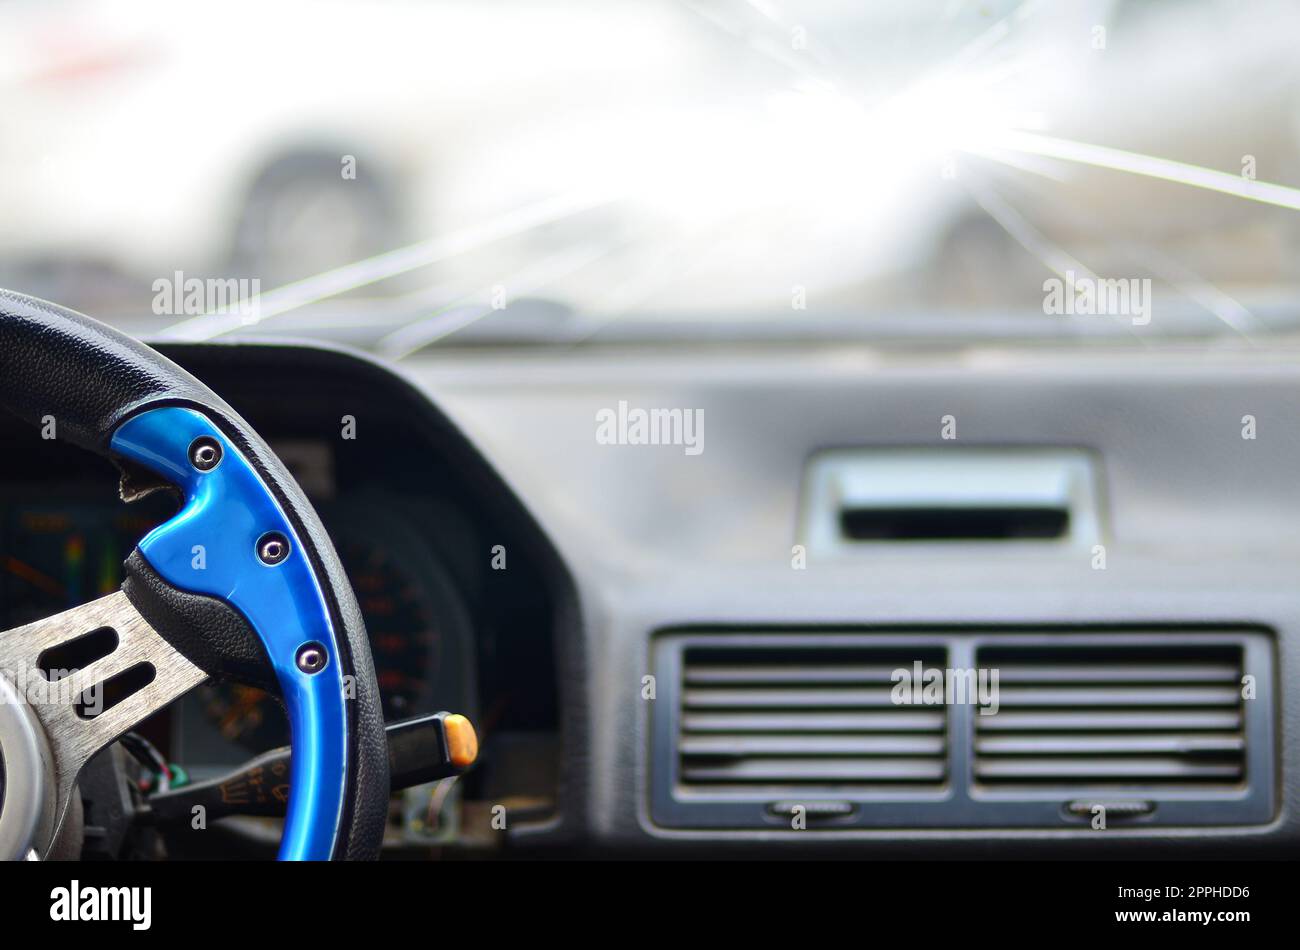 Interior of a car during a traffic accident Stock Photo